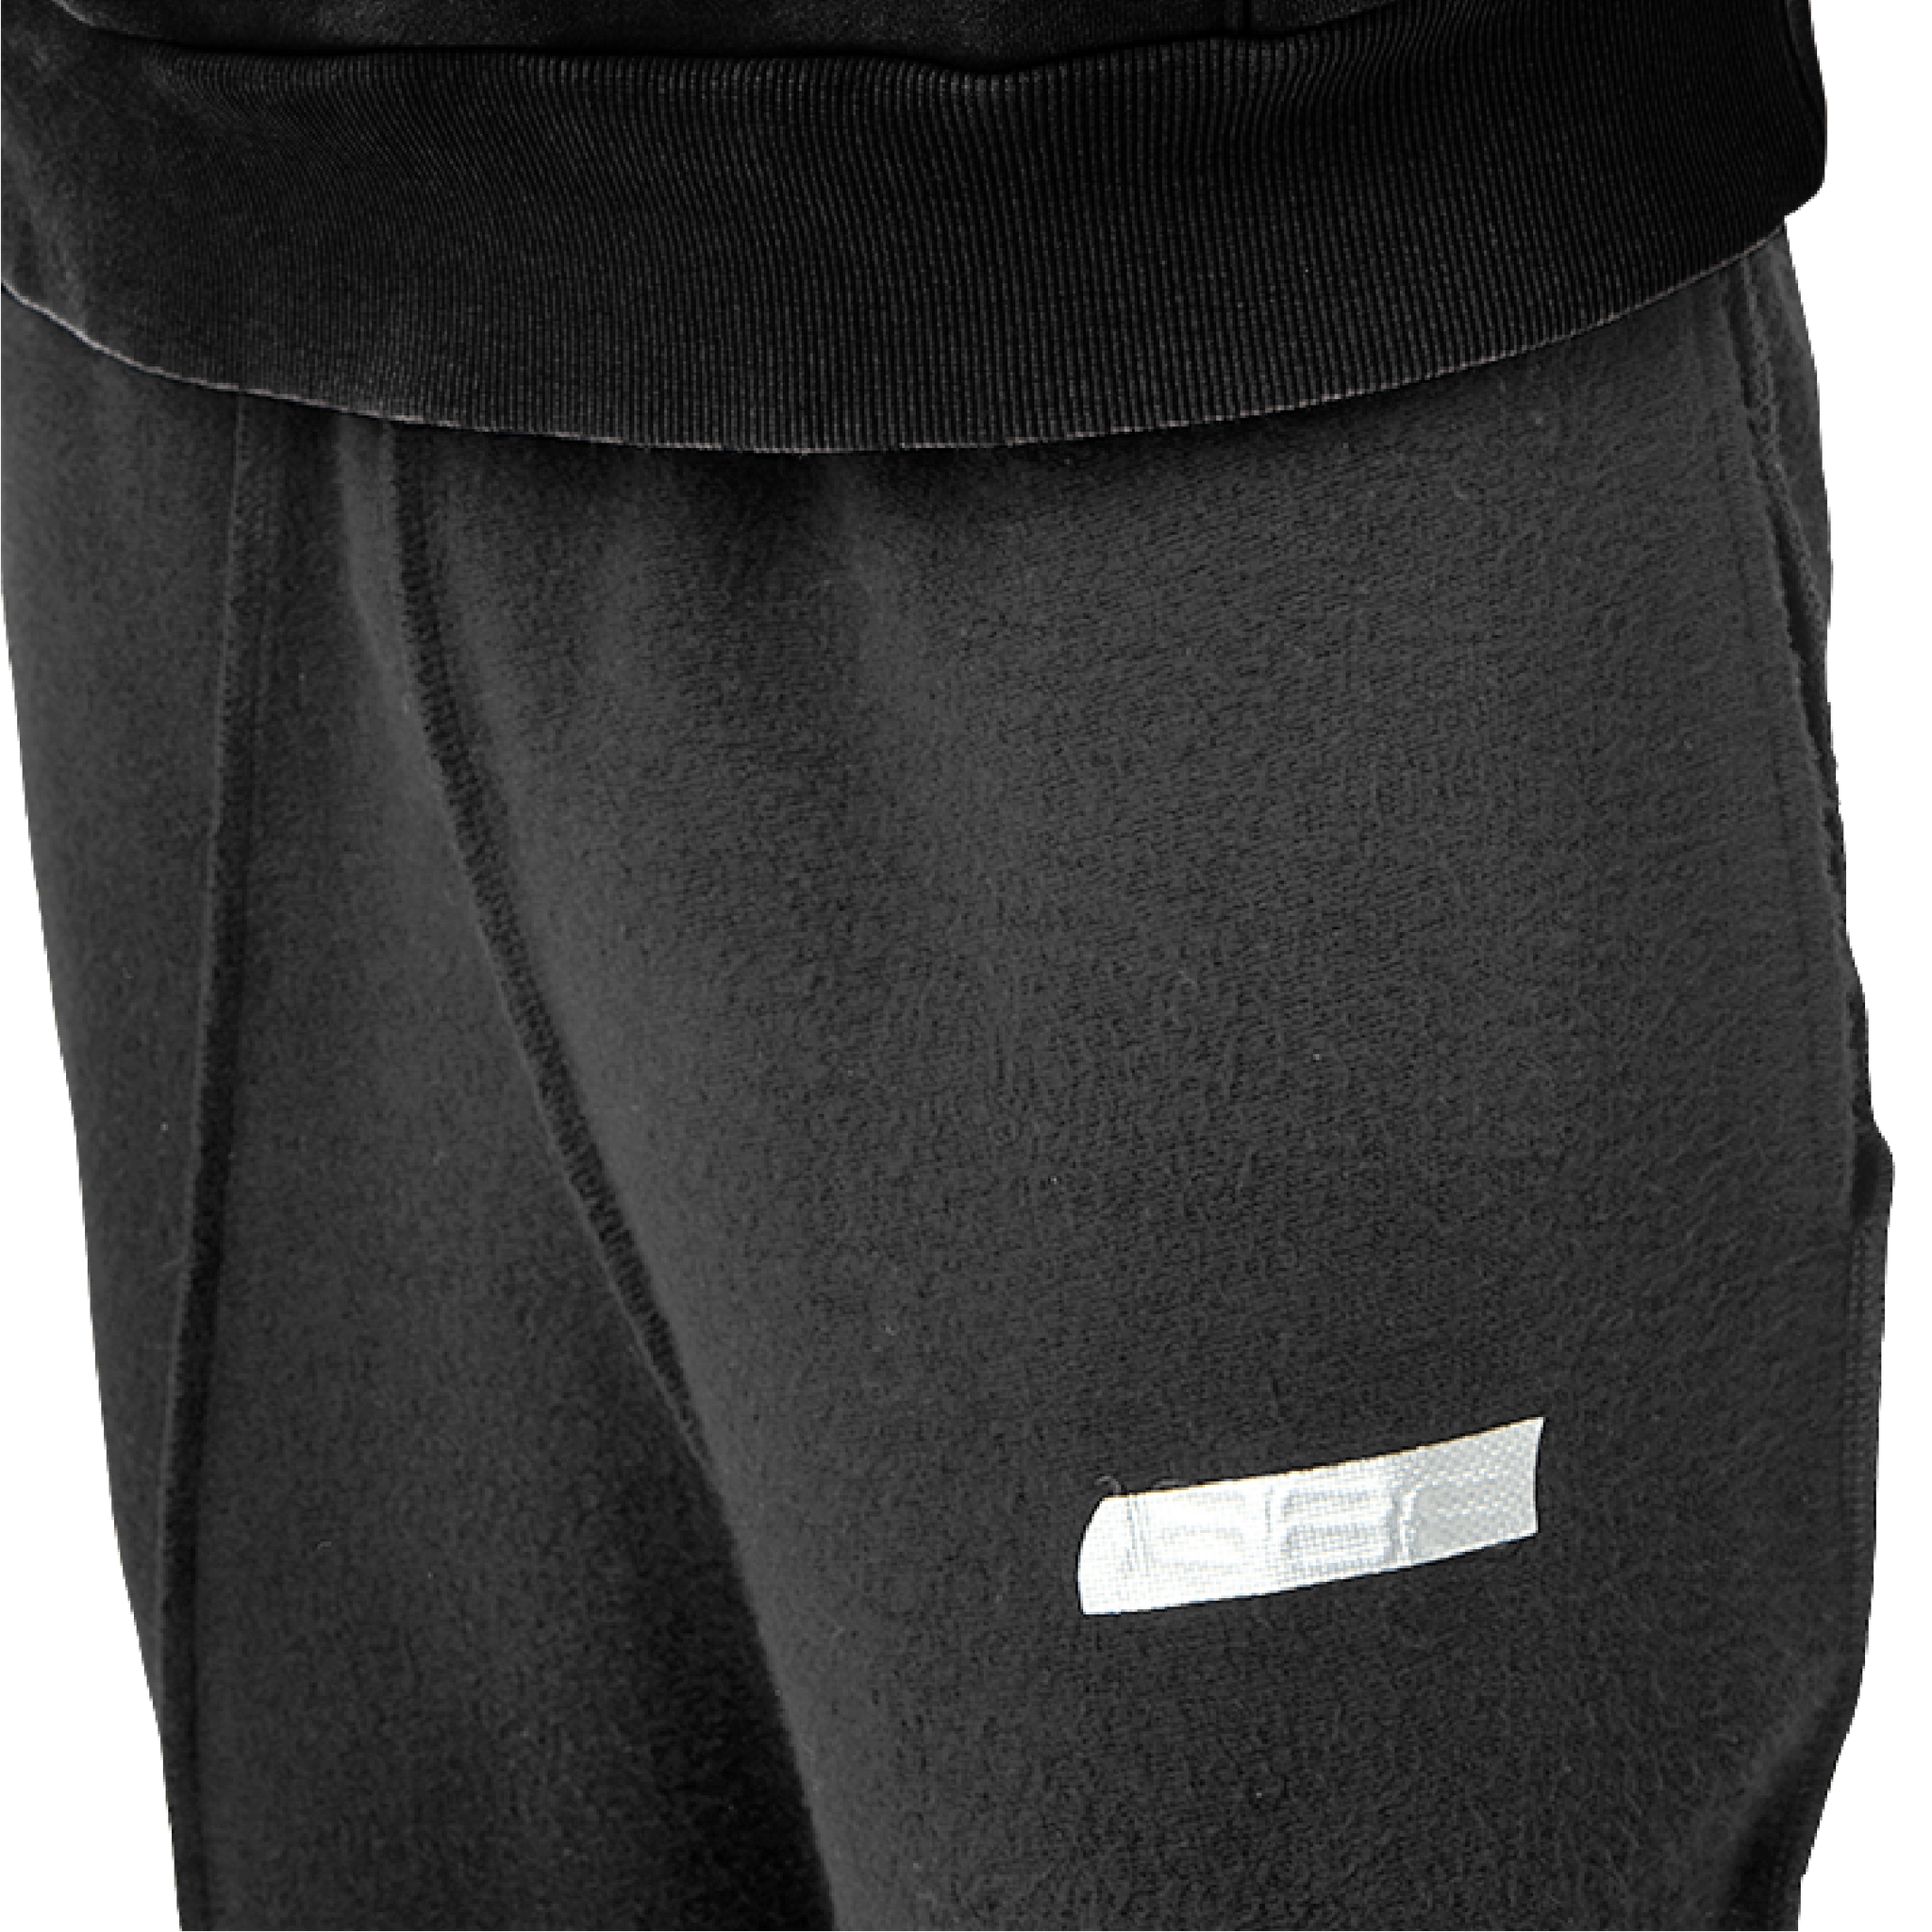 Oversize cut sweatpants in washed charcoal grey fabric featuring 1886 logo embroidered at front. Elasticized waistband. Pockets at side.